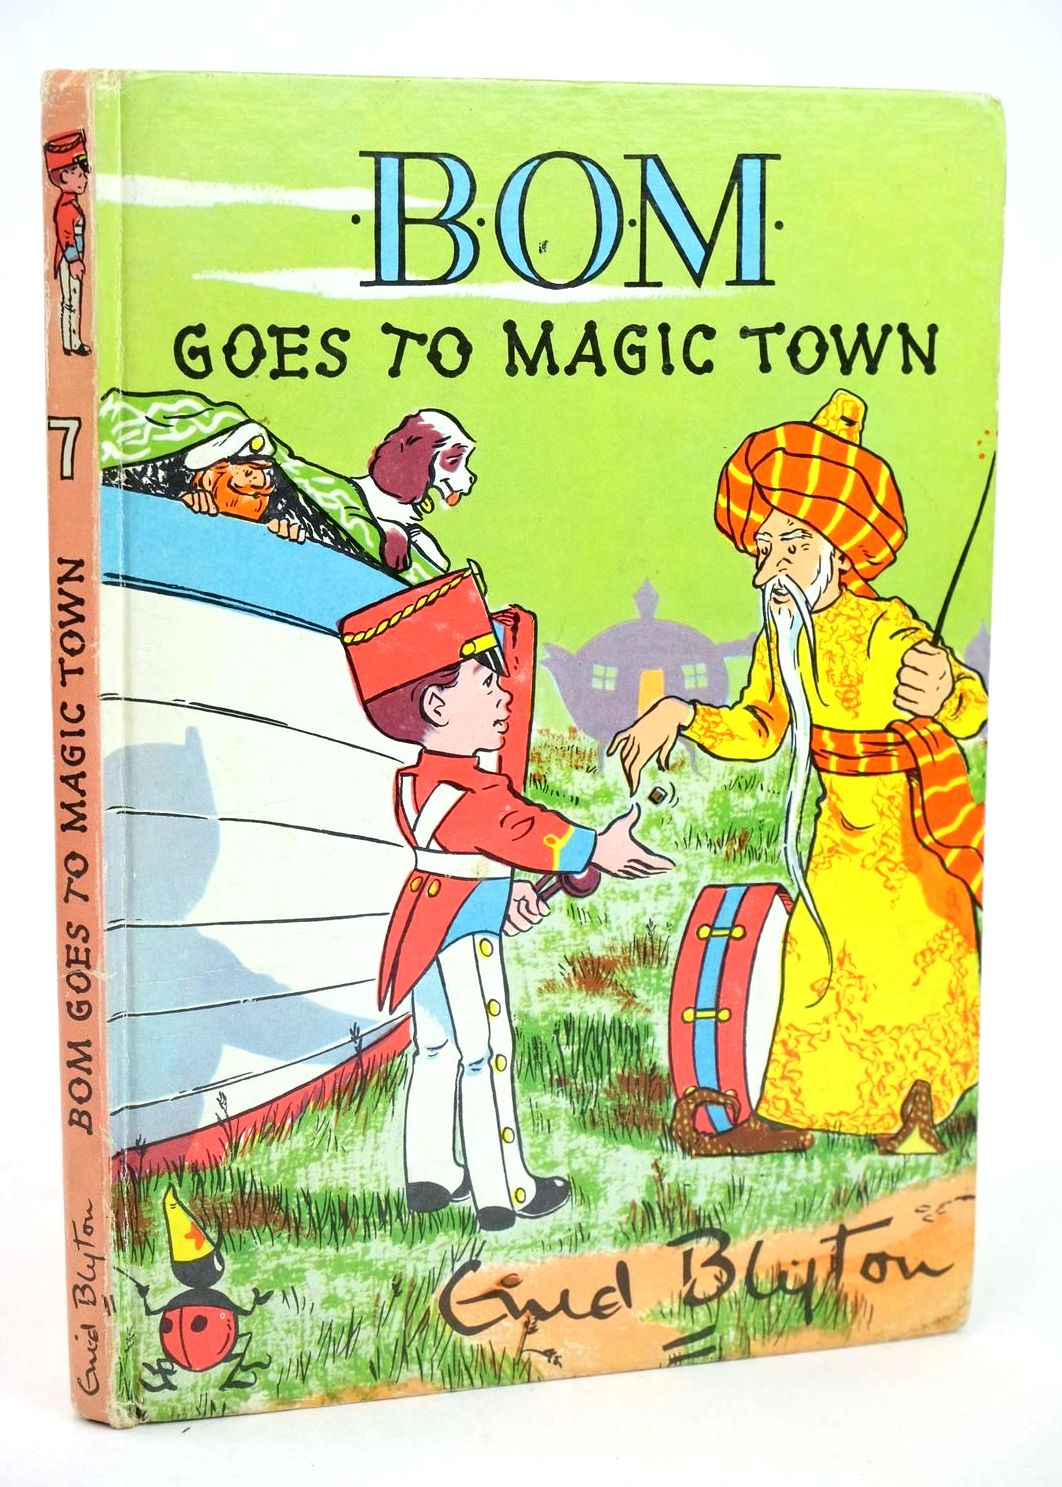 Photo of BOM GOES TO MAGIC TOWN written by Blyton, Enid illustrated by Paul-Hoye, R. published by Brockhampton Press (STOCK CODE: 1318984)  for sale by Stella & Rose's Books